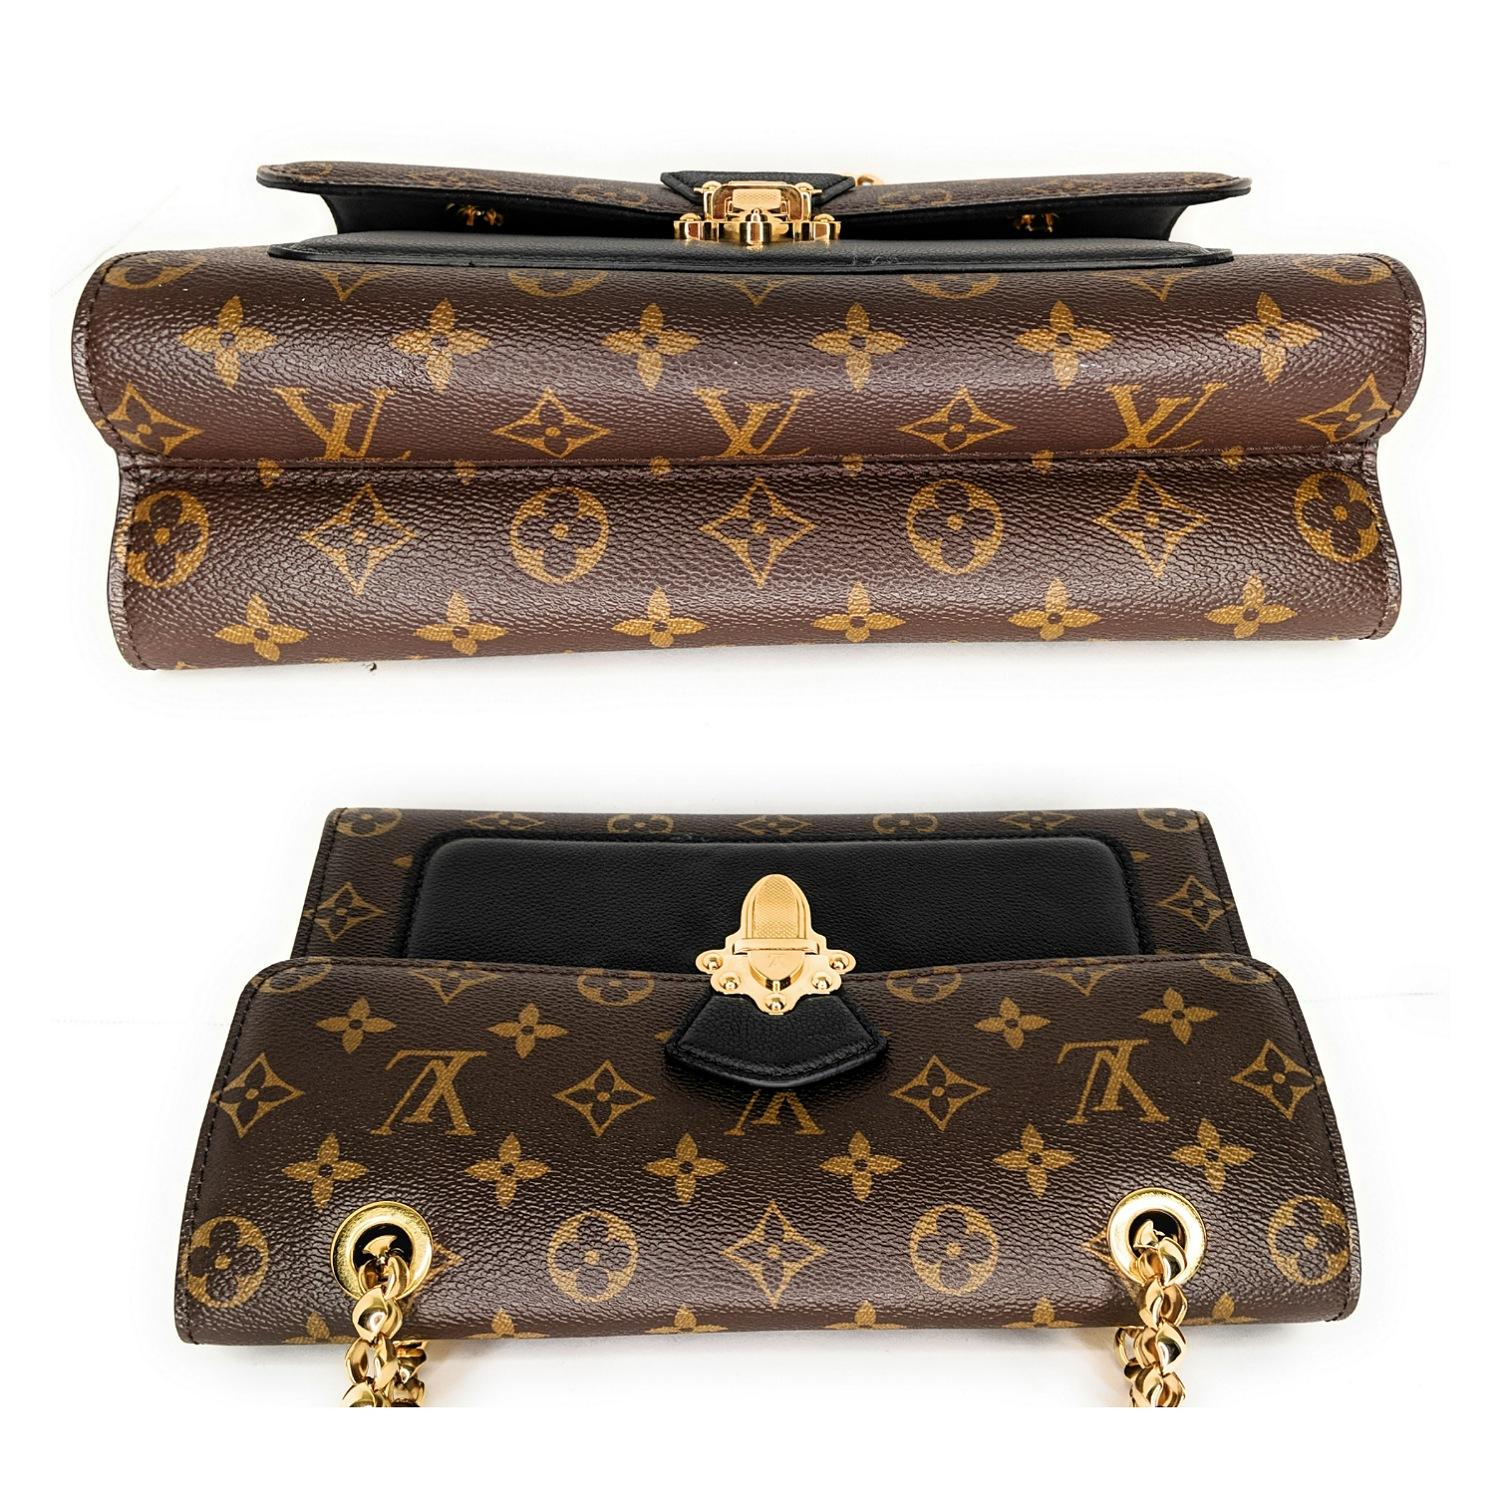 louis vuitton bag with gold chain